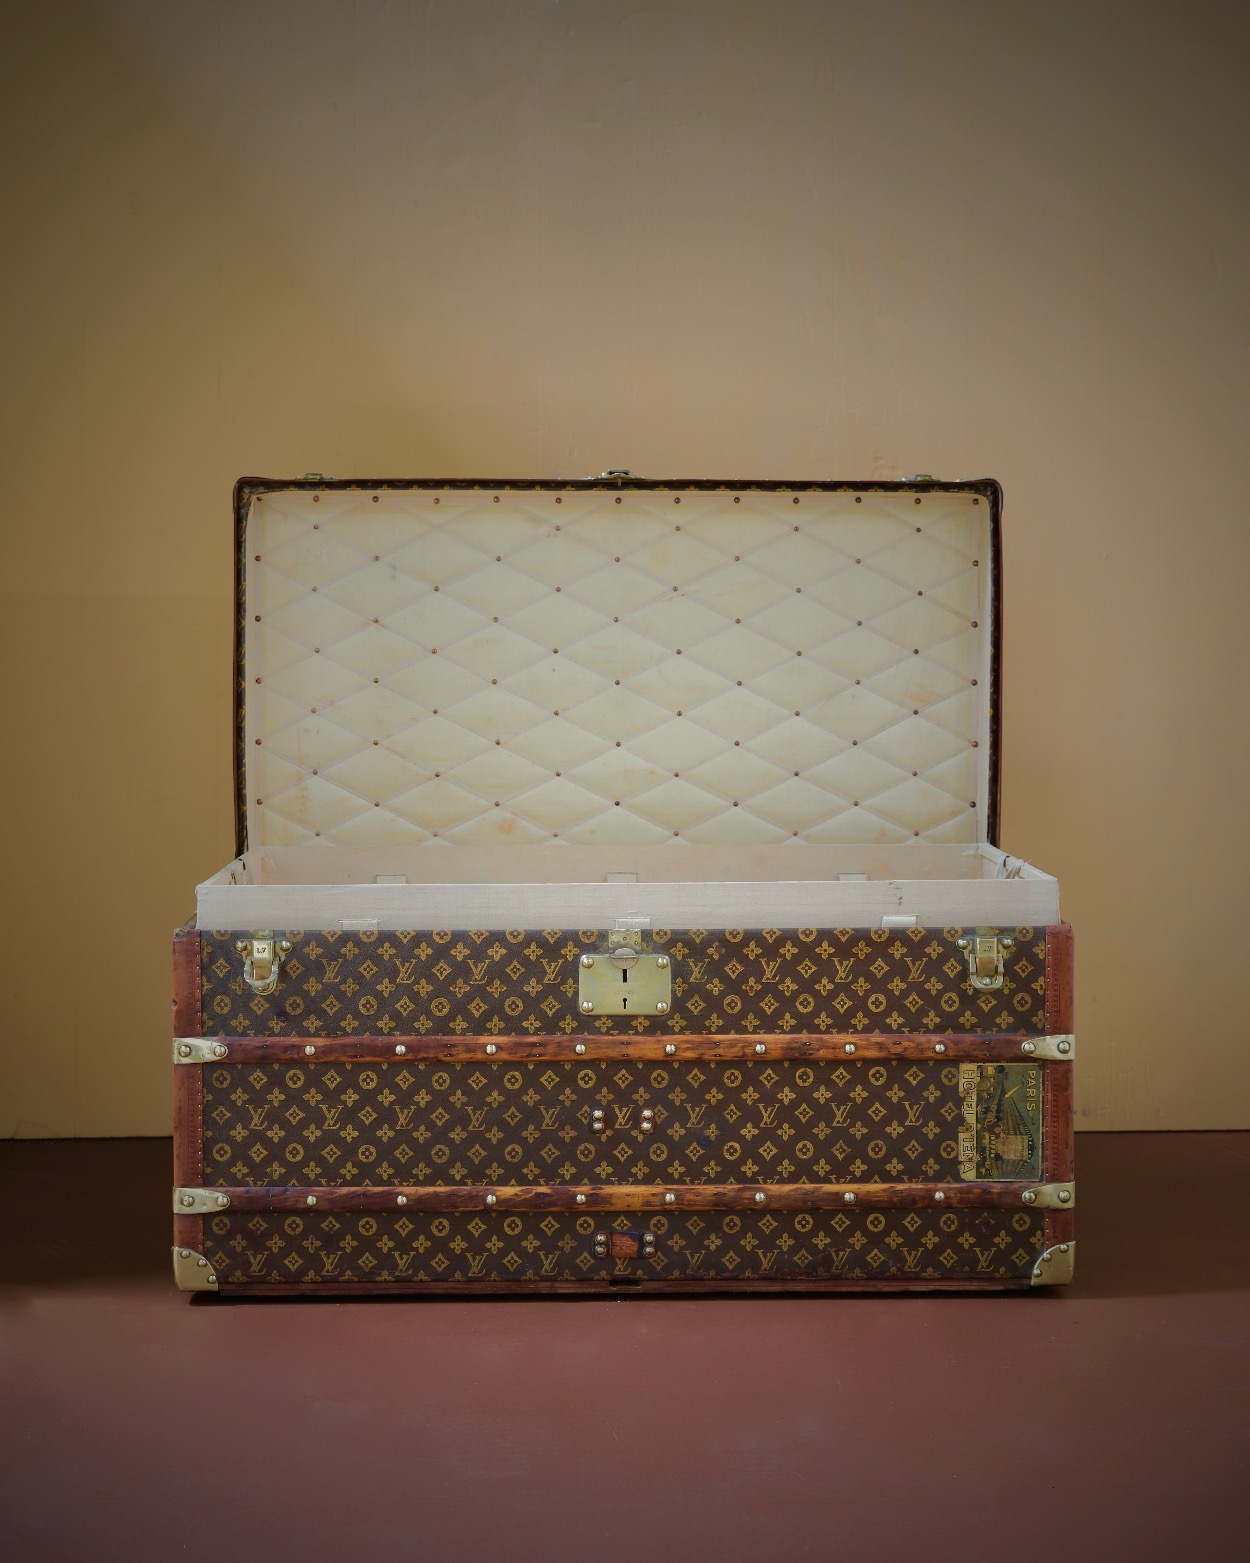 the-well-traveled-trunk-louis-vuitton-thumbnail-product-5781